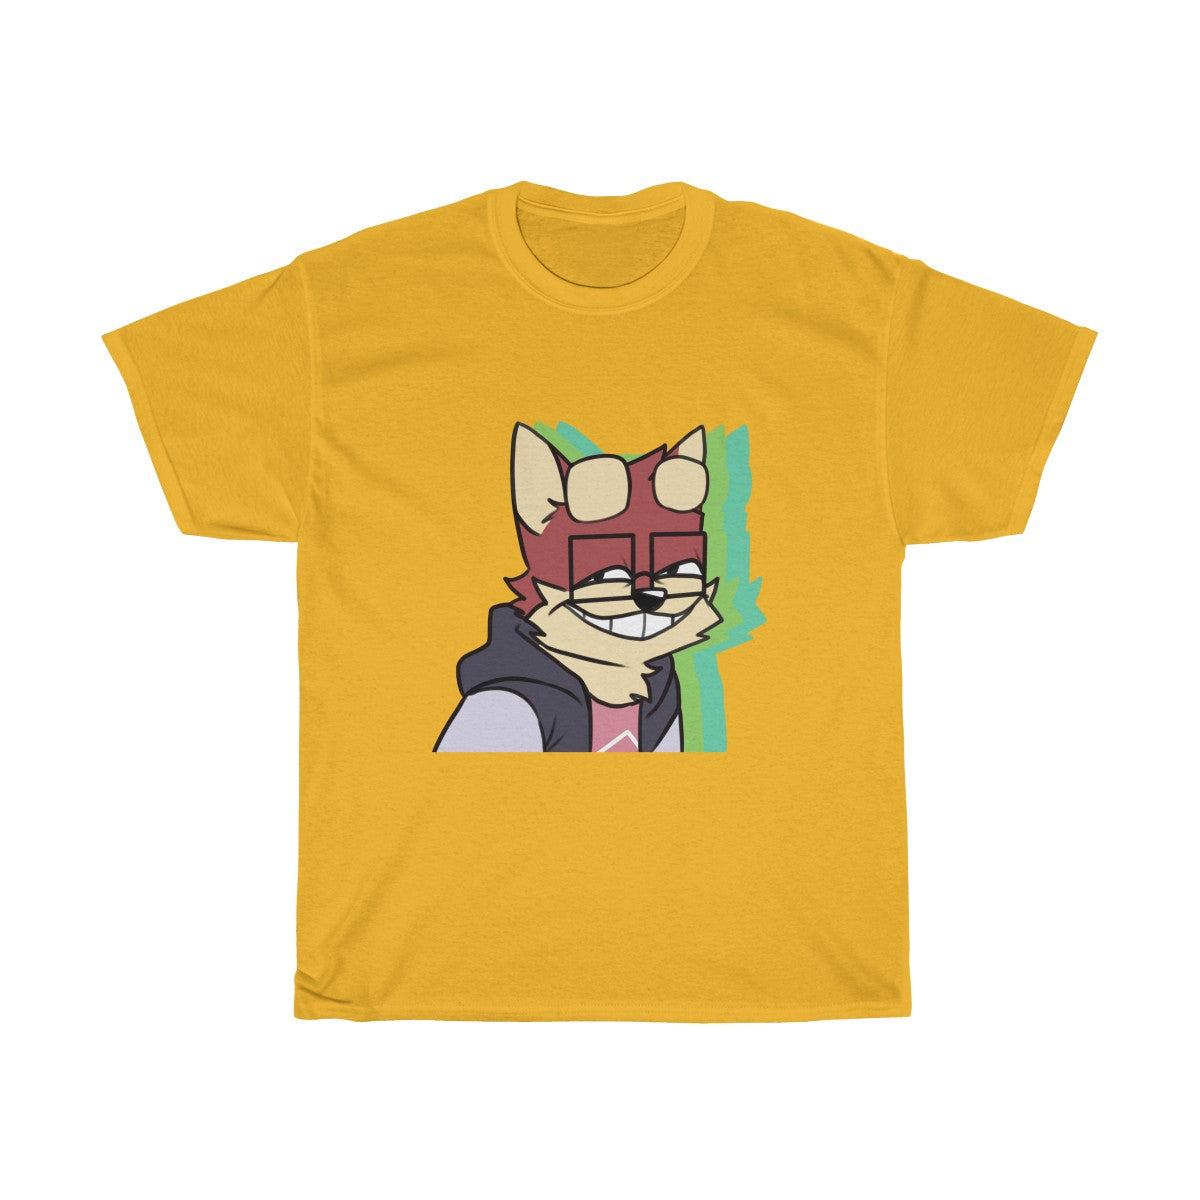 Thinking About You - T-Shirt T-Shirt Ooka Gold S 